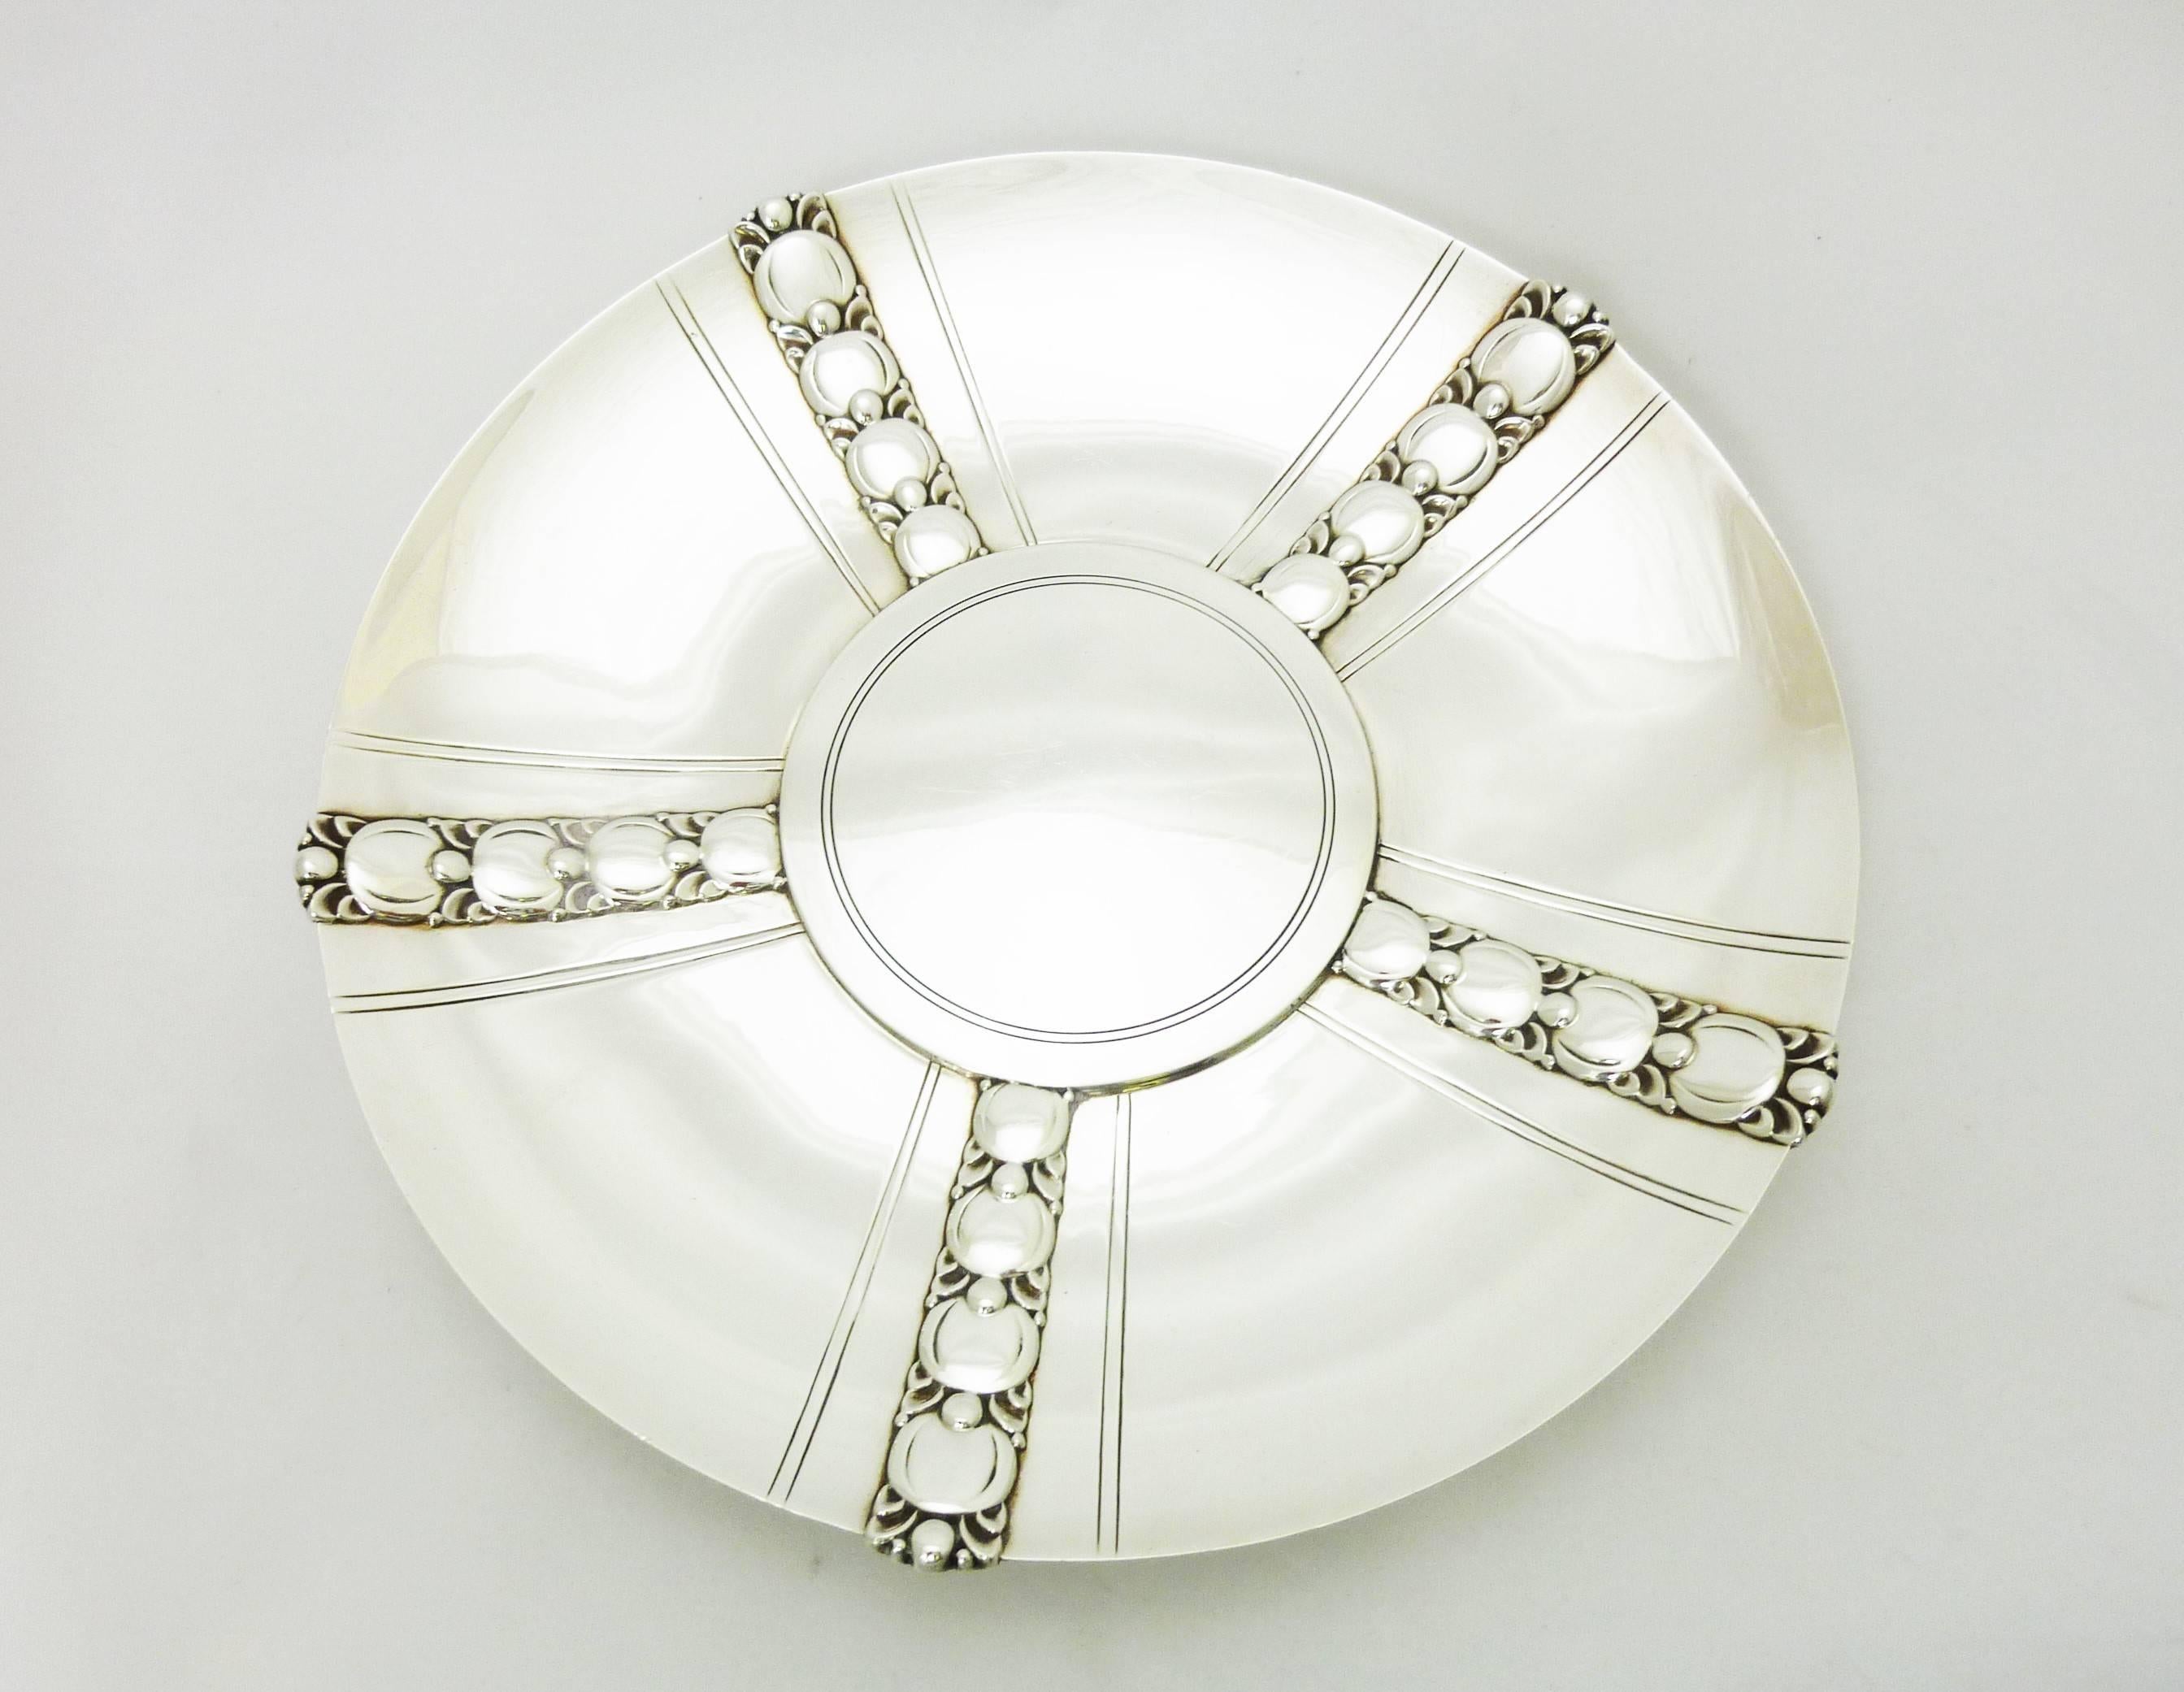 Being offered is a circa 1945 salad serving set by Tiffany & Co. of New York, comprising a bowl, underplate and pair of salad servers in the 'Tomato' pattern. Special pattern designed in 1937 by Olaf Wilford. Dimensions: Plate 10 inches diameter;